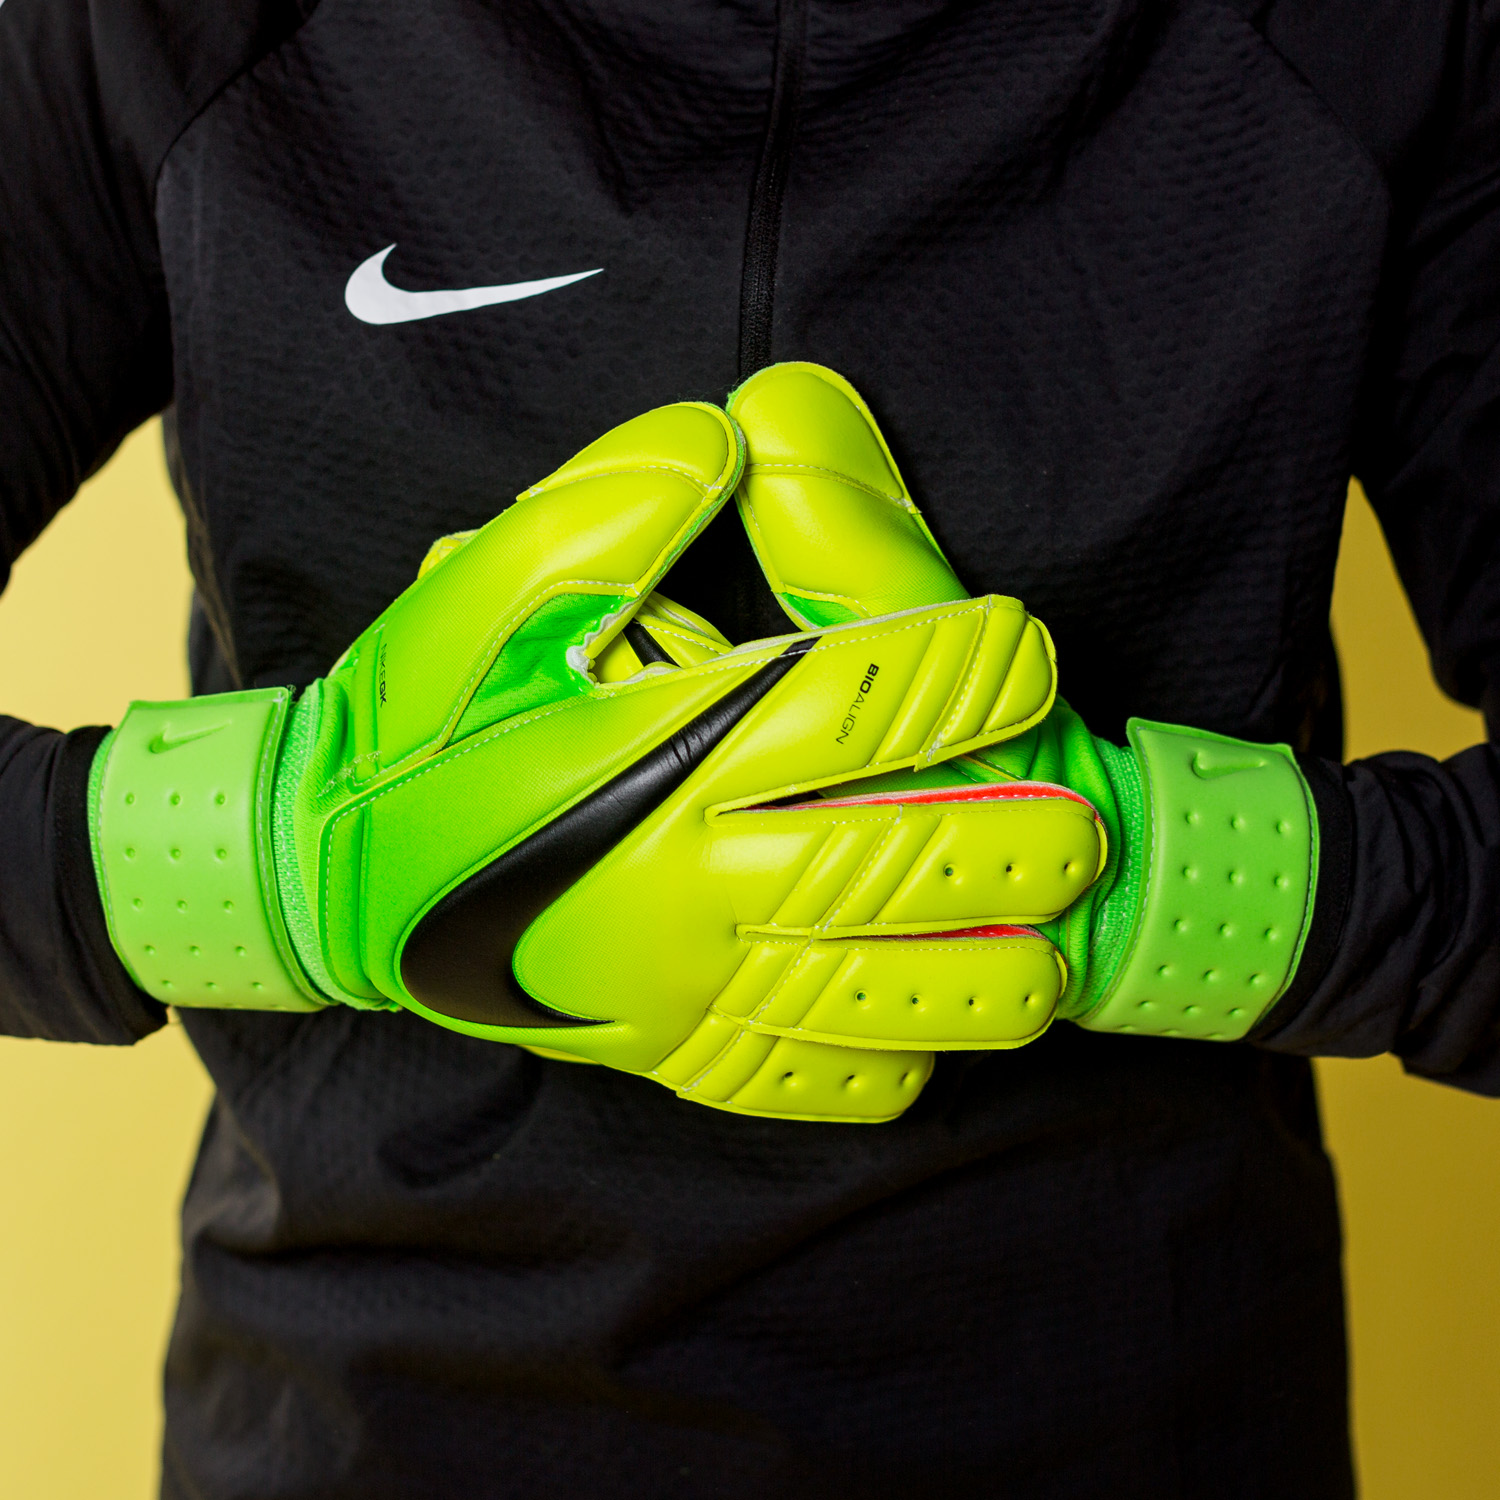 nike goalkeeper gloves with finger protection